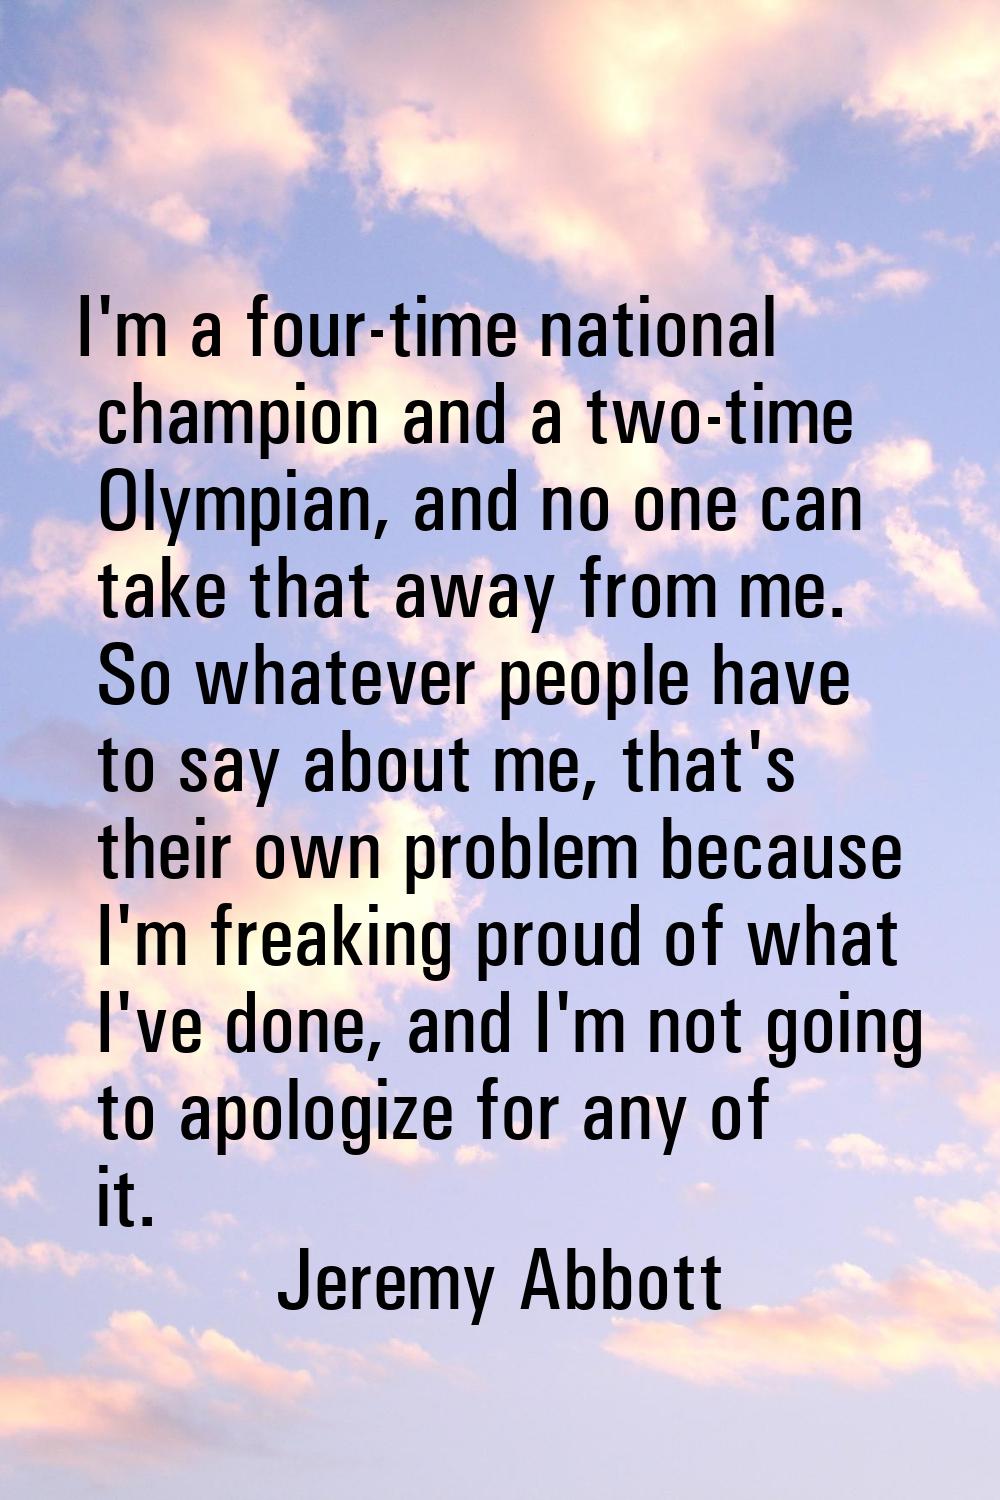 I'm a four-time national champion and a two-time Olympian, and no one can take that away from me. S